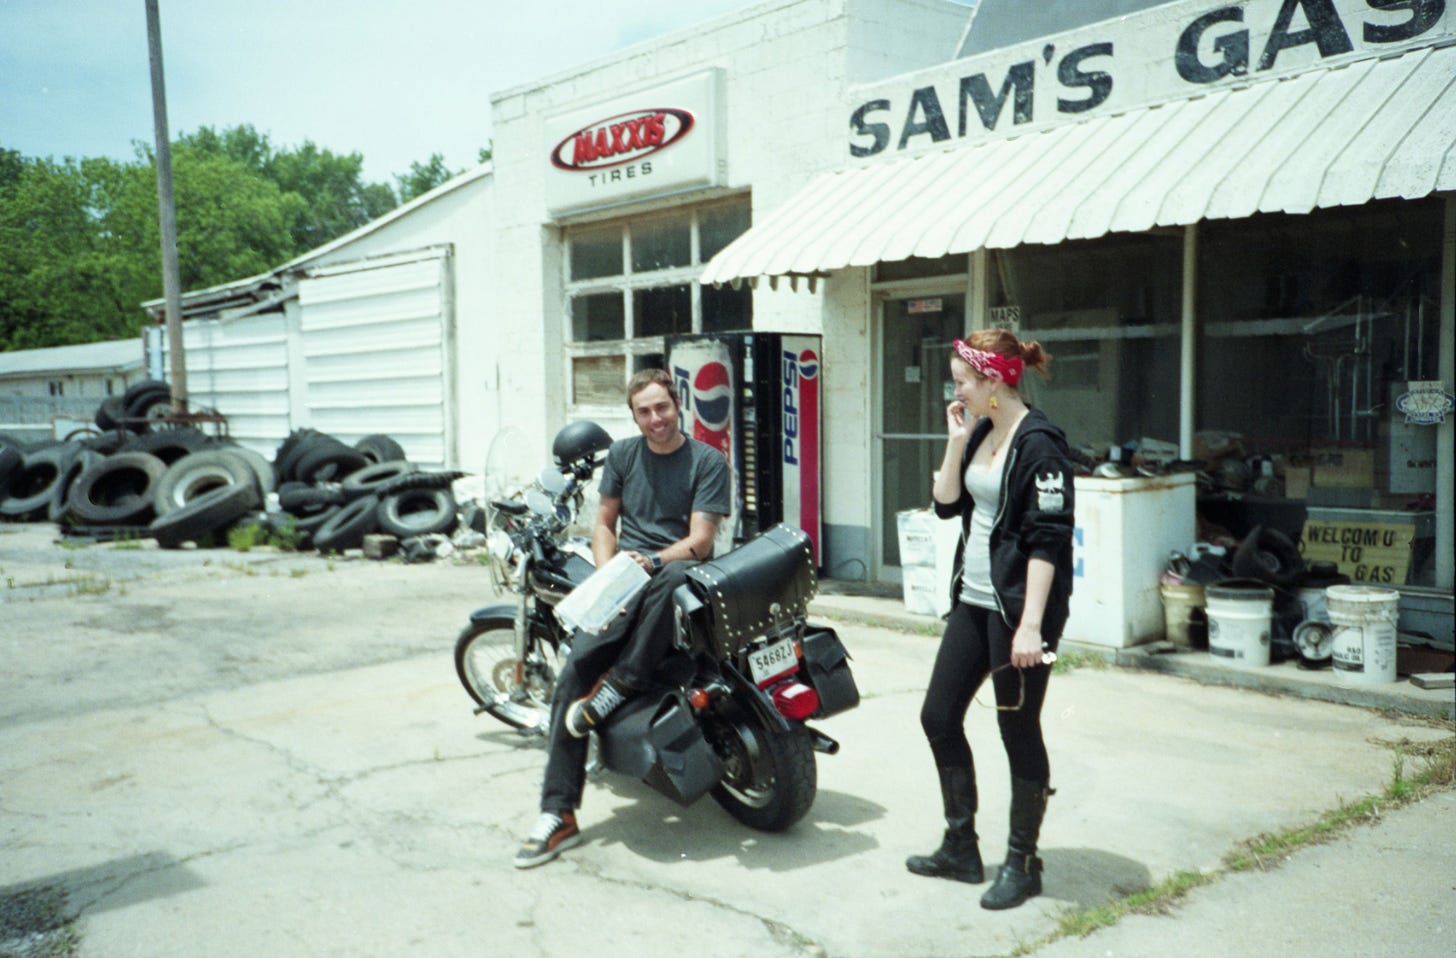 Derrick sits on the parked bike. He looks into camera, smiling slightly. Amber stands near him, looking at him. They are in front of a rundown looking storefront called "Sam's Garage." There is a pile of tires in the background. 